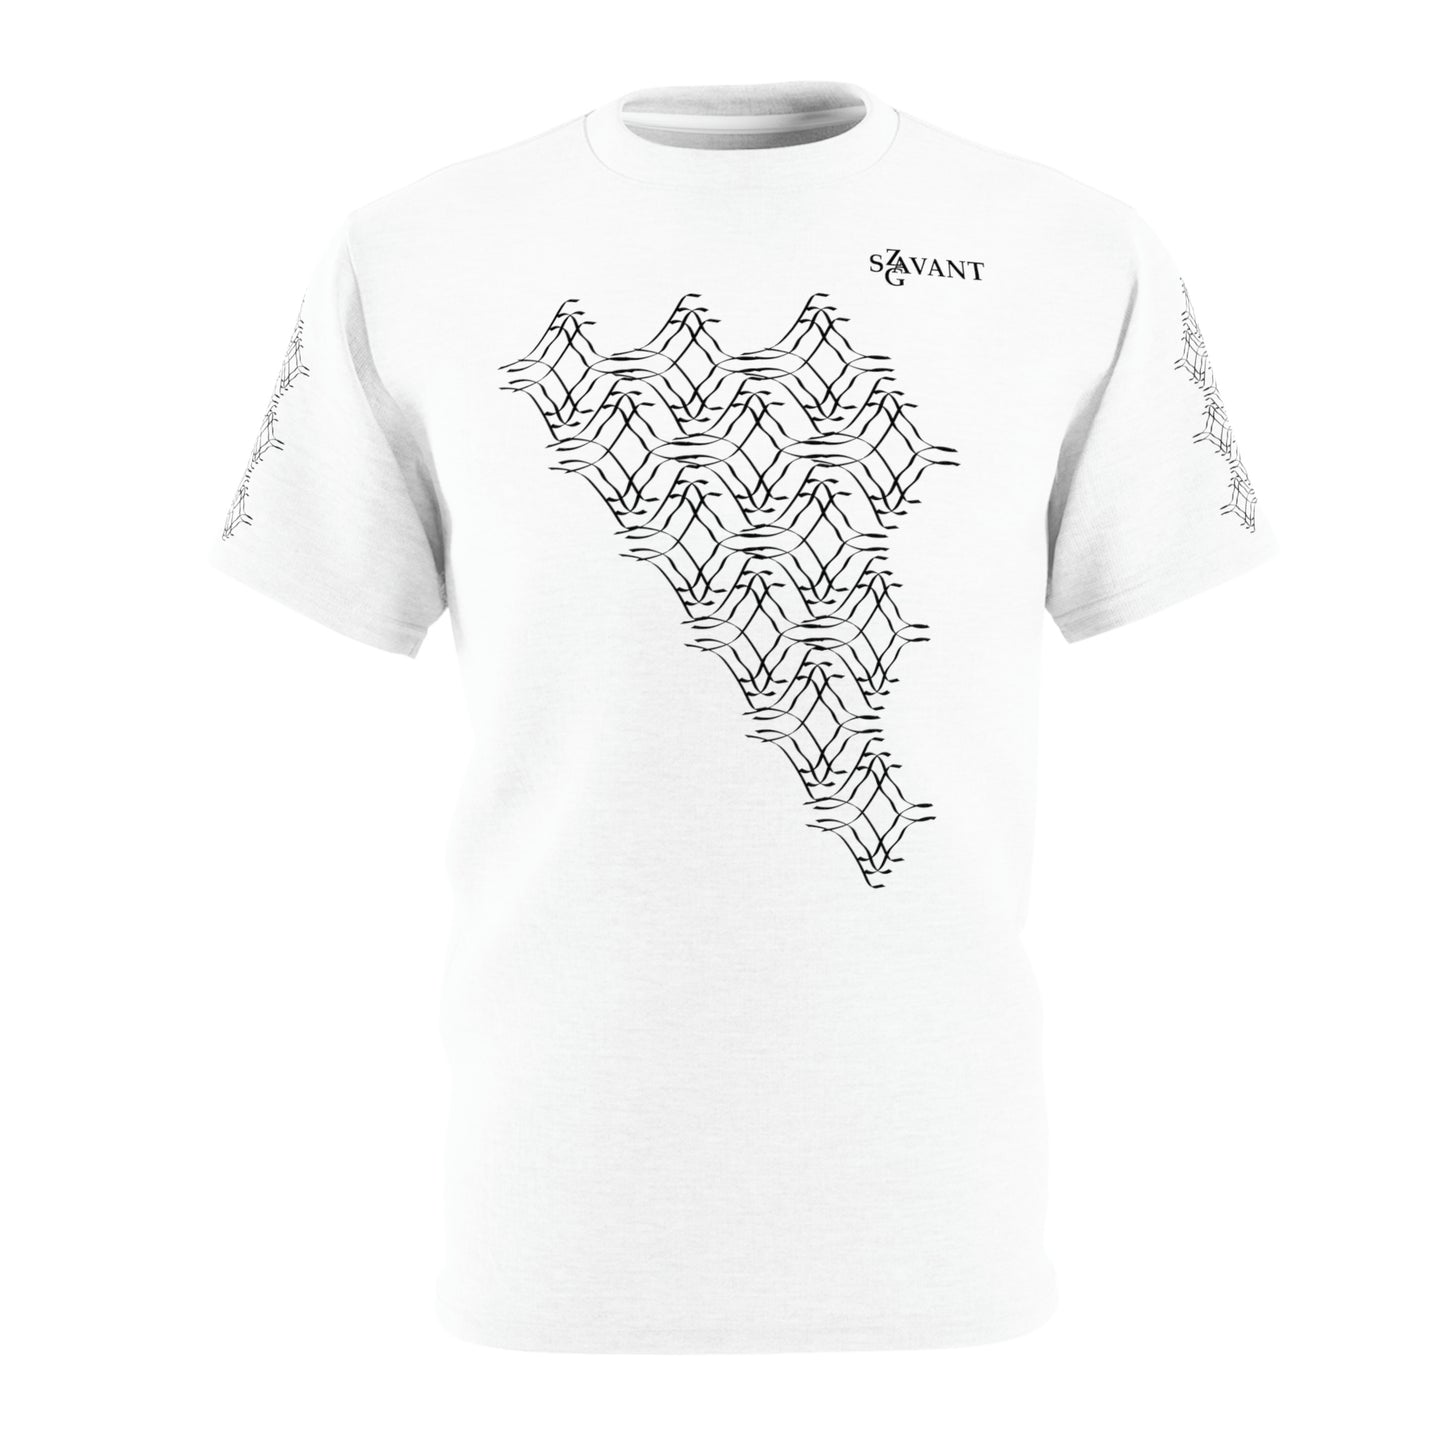 Men’s Cut & Sew Graphic T-shirt - White and Black